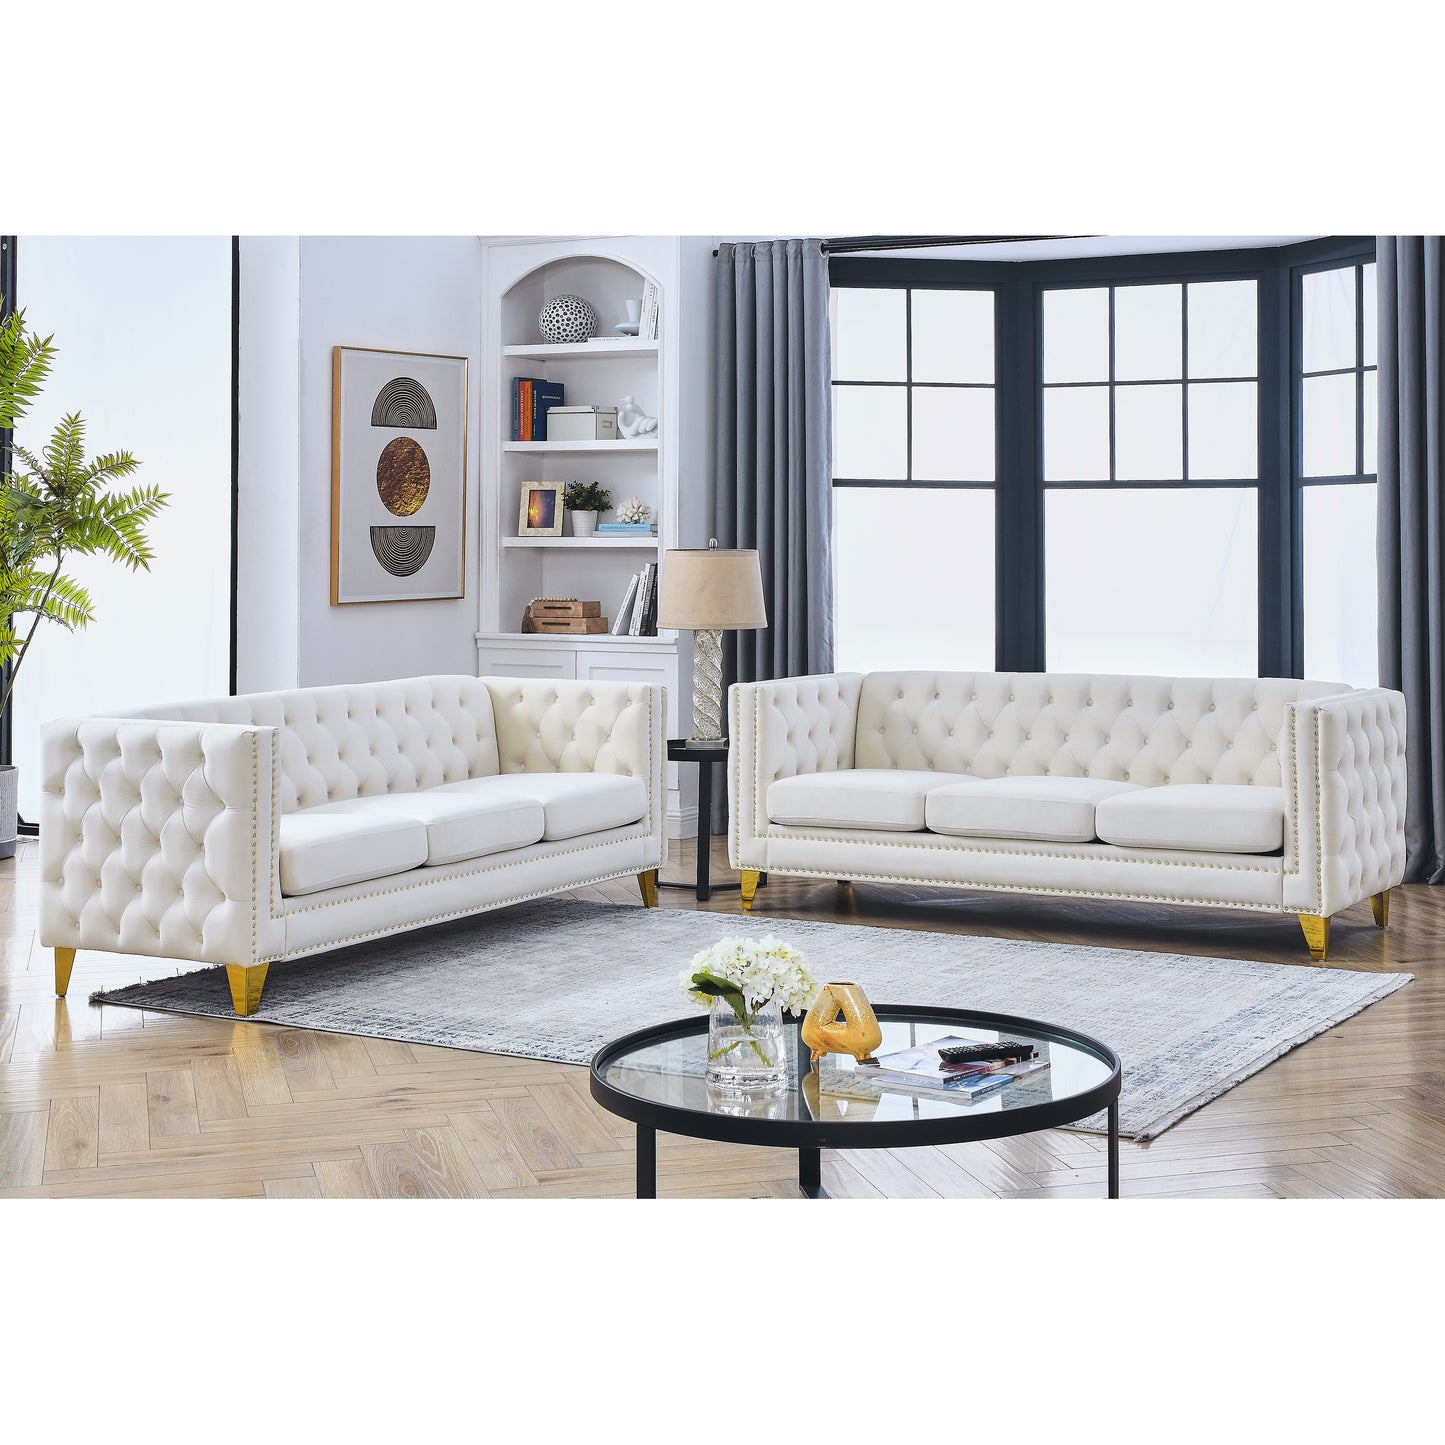 Velvet Sofa for Living Room,Buttons Tufted Square Arm Couch, Modern Couch Upholstered Button and Metal Legs, Sofa Couch for Bedroom, Beige Velvet ,2PCS